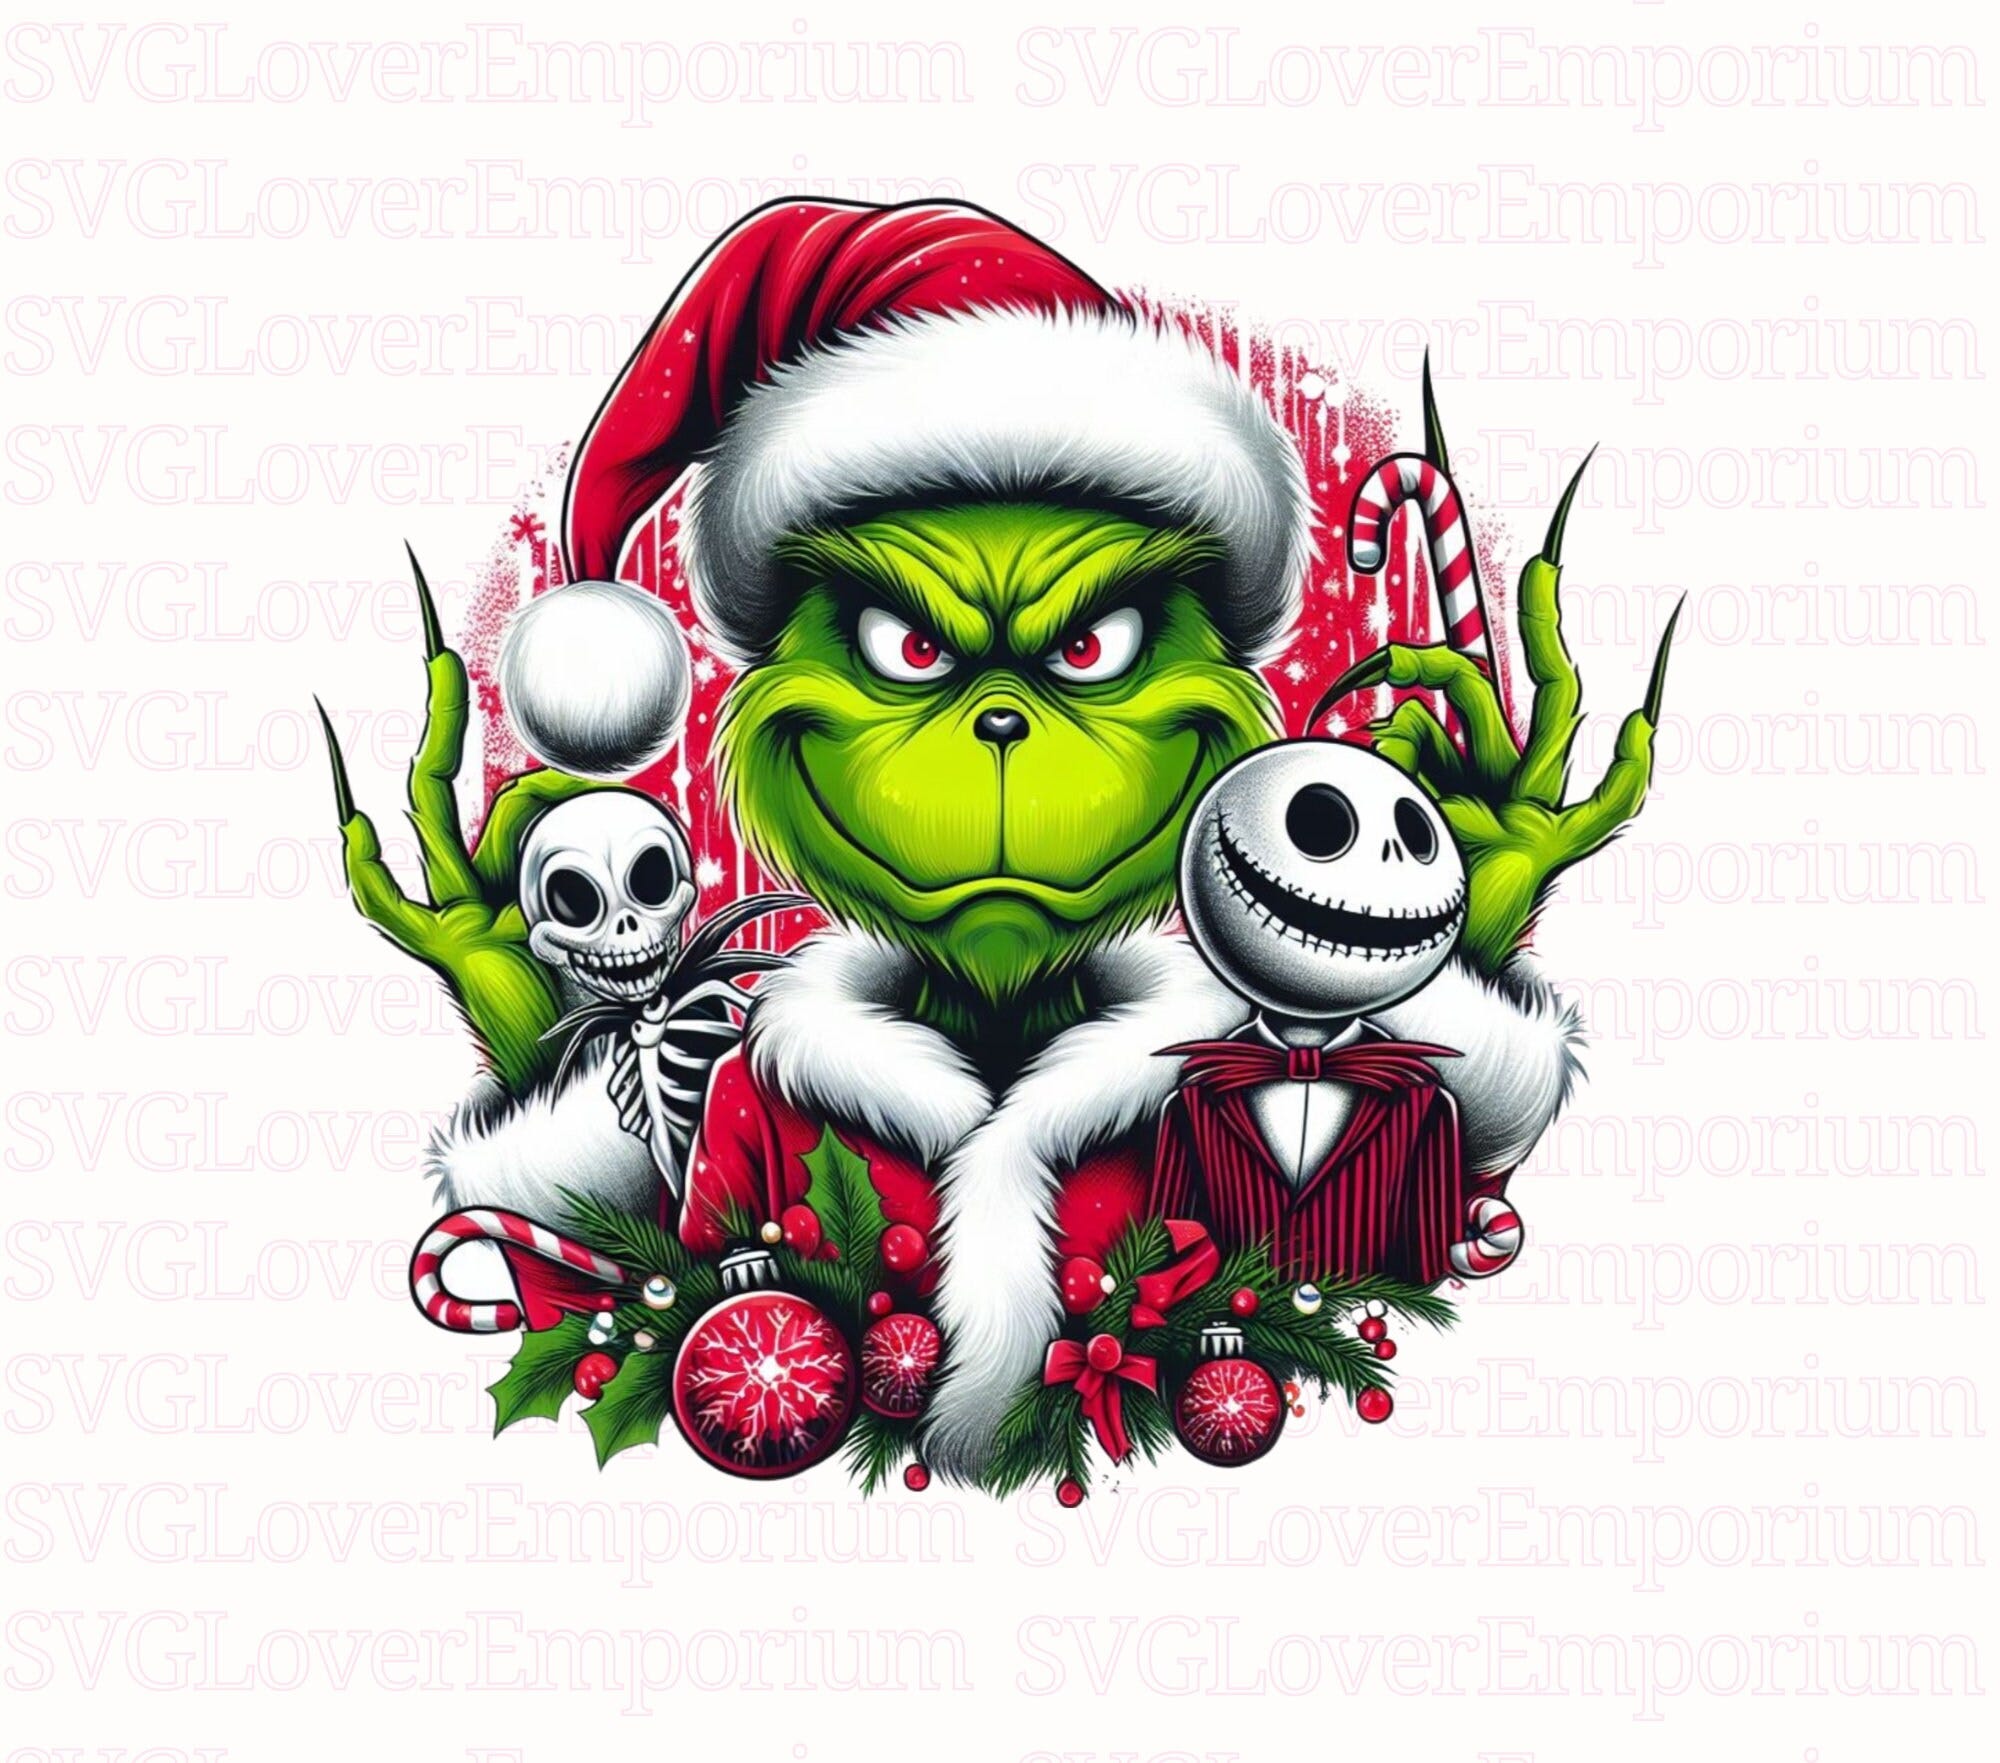 Grich Png, Nightmare Before Christmas Png, Grichmas Png, Jack And Grich Skeleton Png, Retro Christmas Png, Grich Face Svg, Digital Art